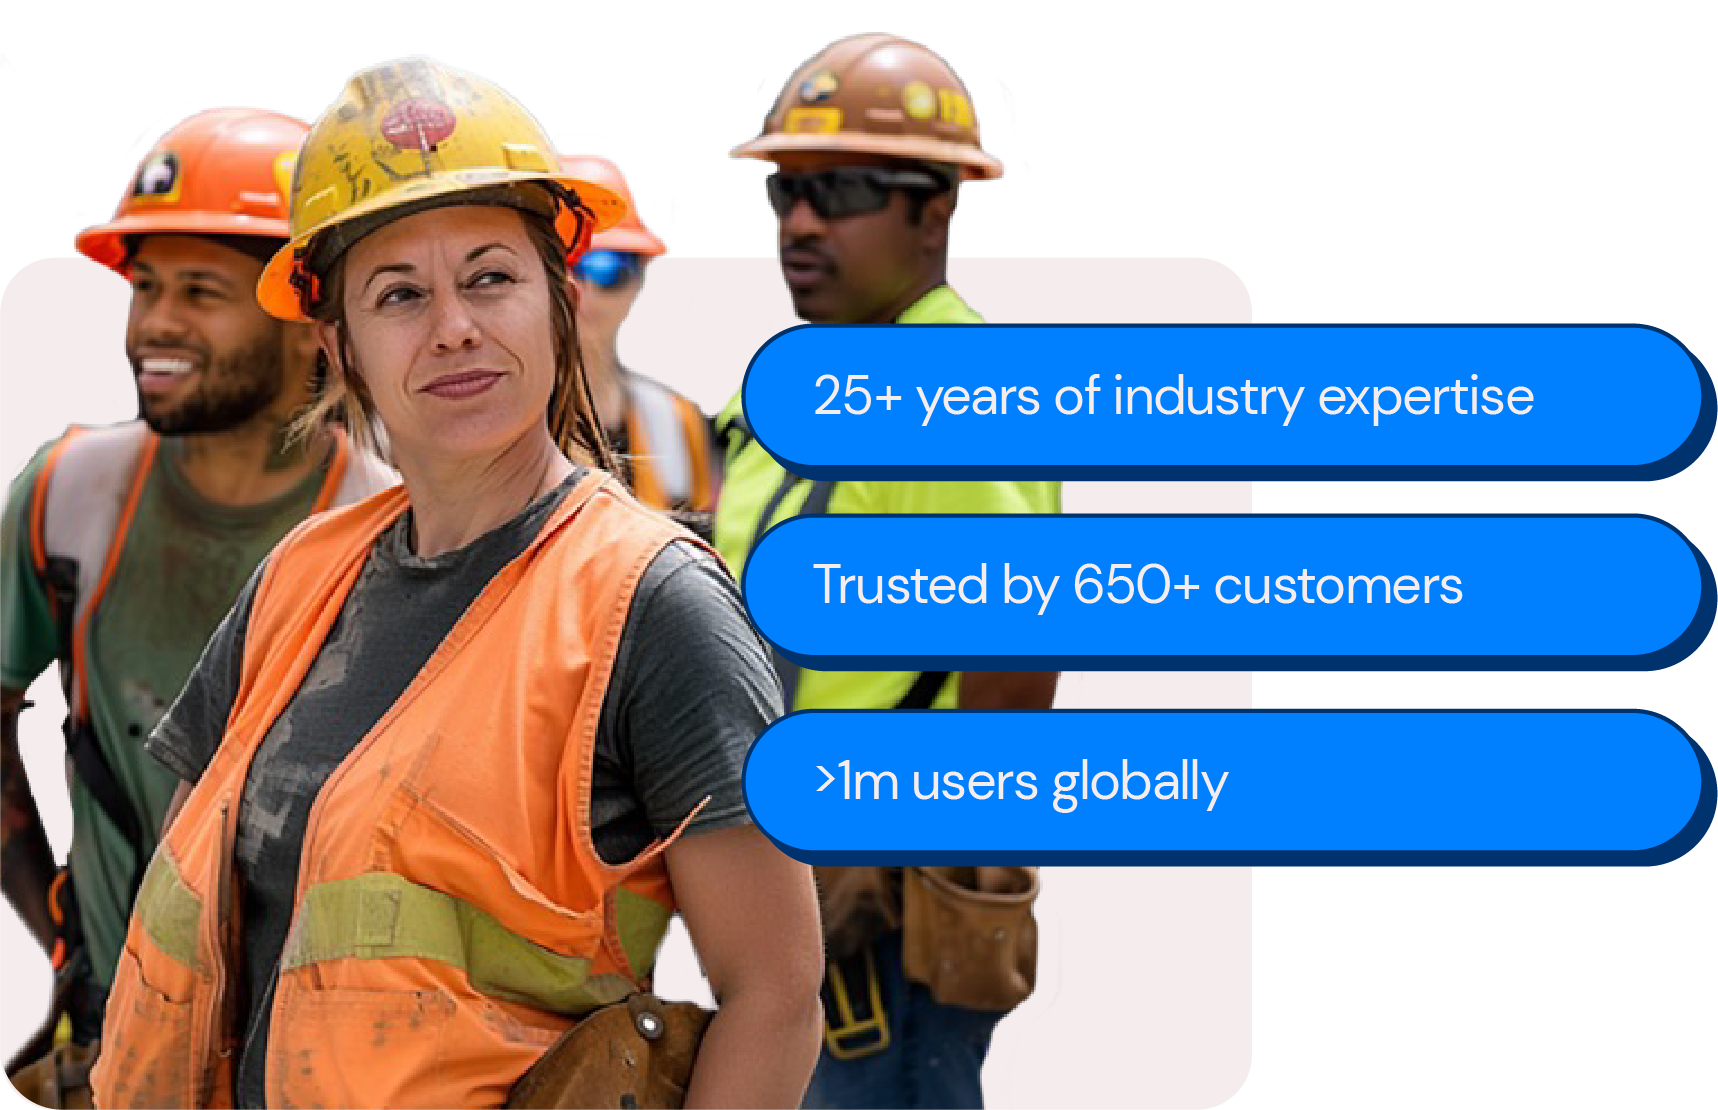 25 Years of experience with over 1 million users